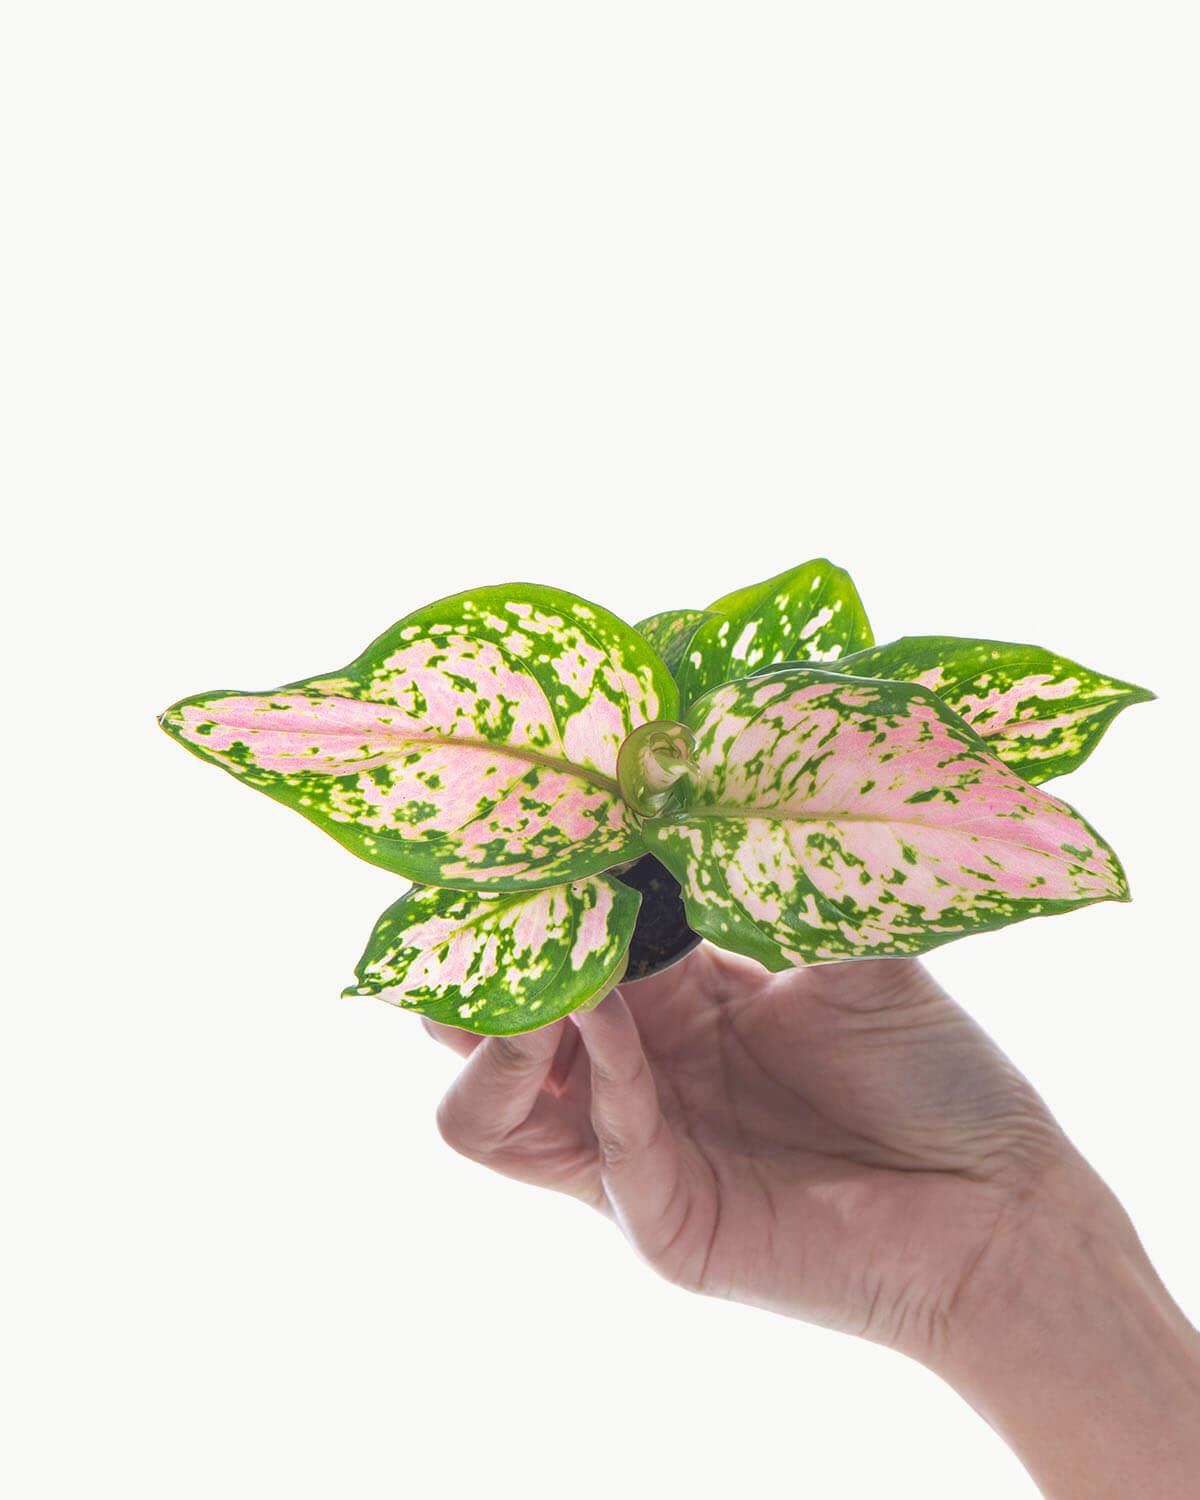 Lil' Chinese Evergreen